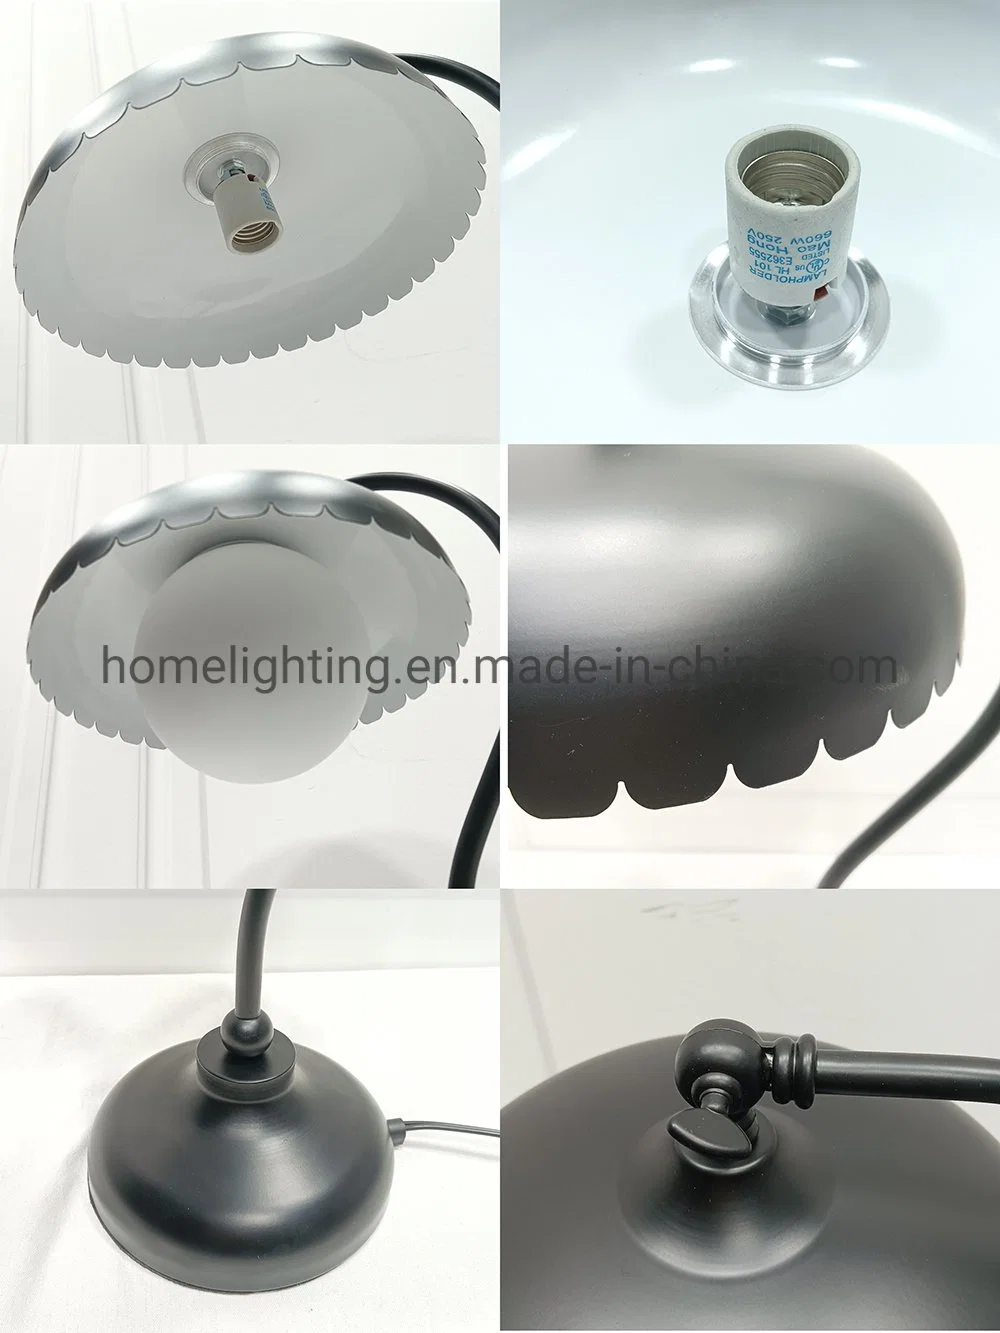 Ht87 Hilton Doubletree Bedside Sofa Side White Task Lamp Frosted Glass Desk Lamp Matte Black Finish Touch lamp